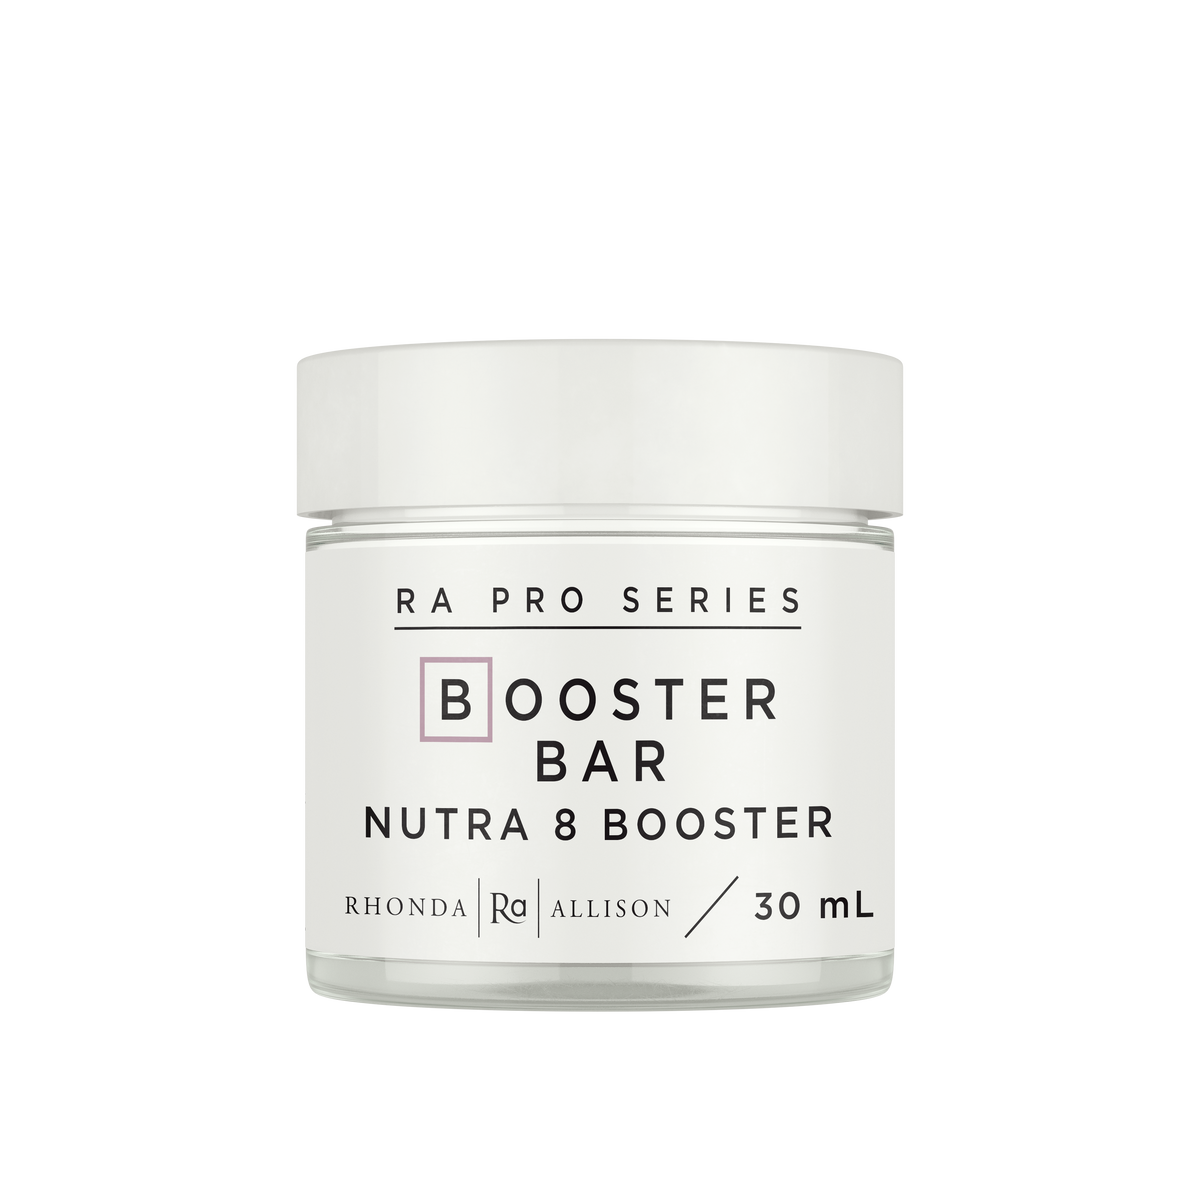 Nutra 8 Booster 15g